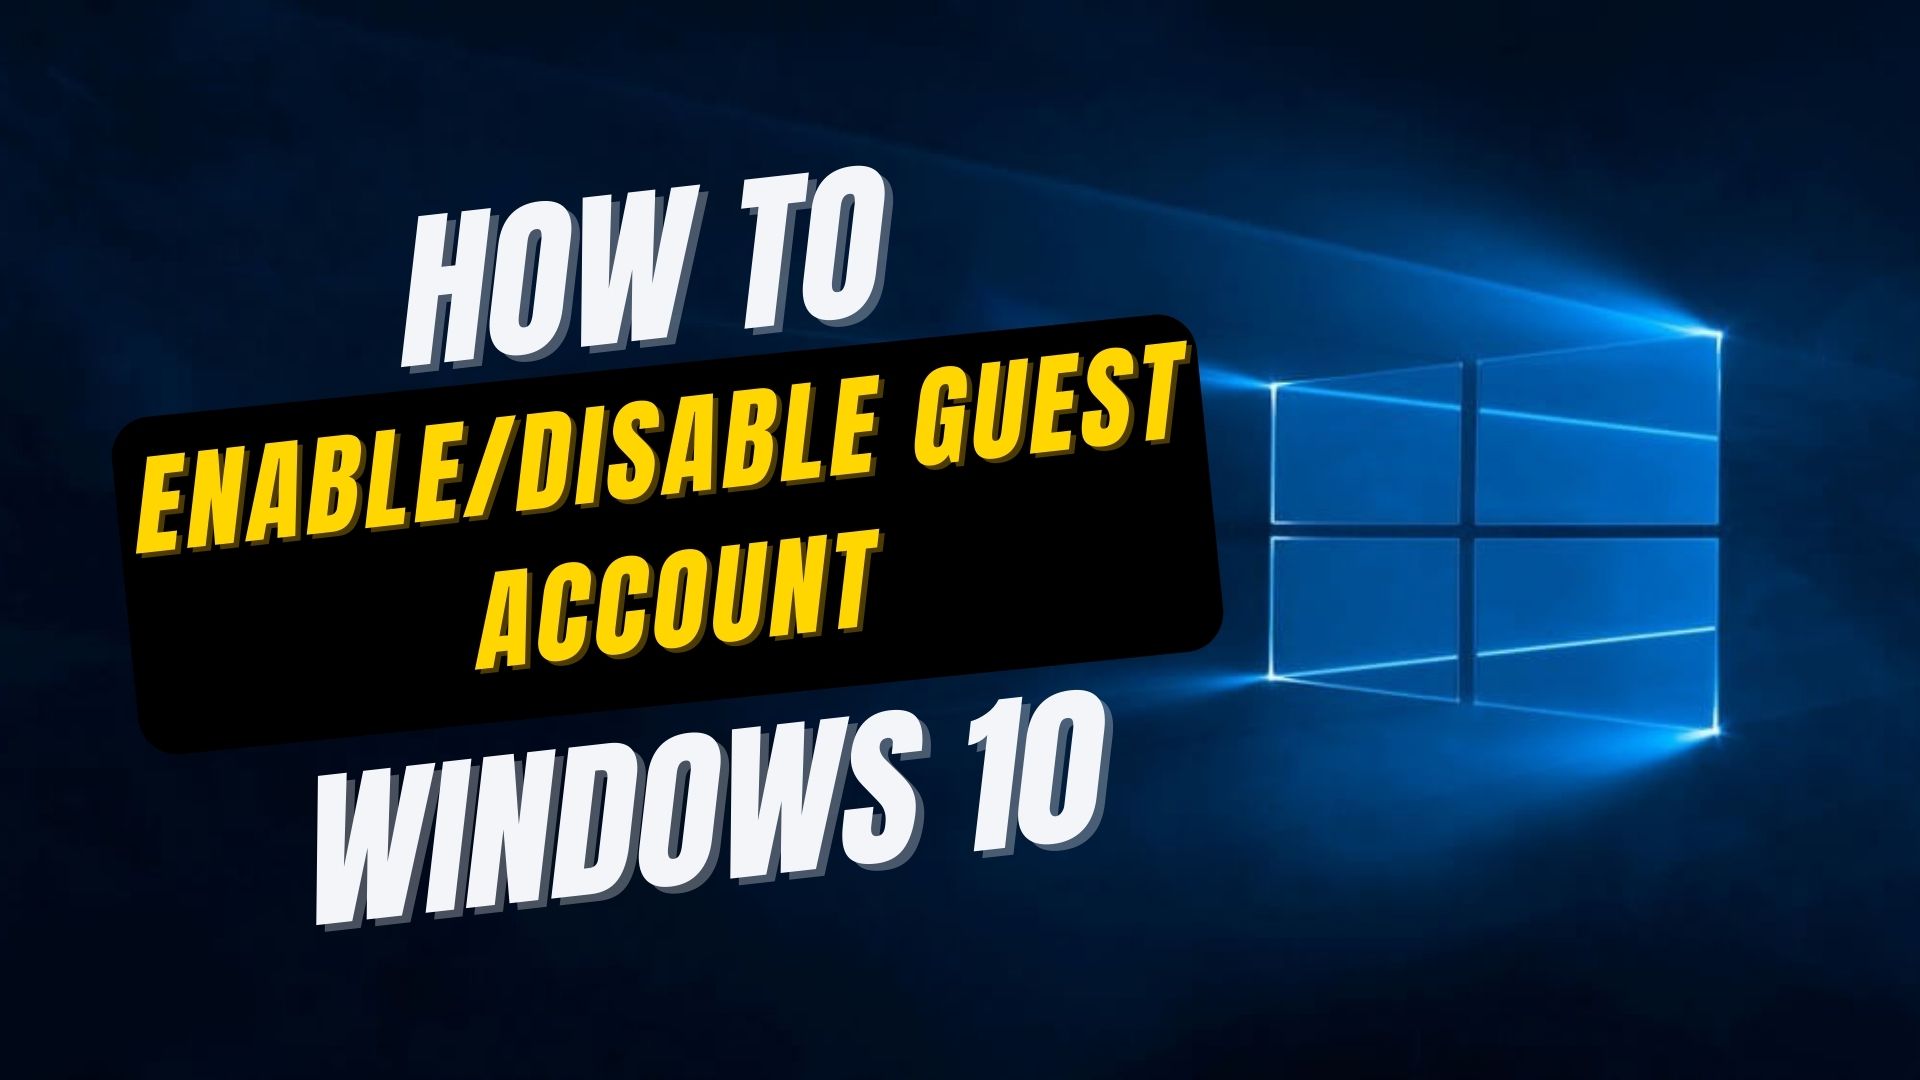 EnableDisable Guest Account in Windows 10